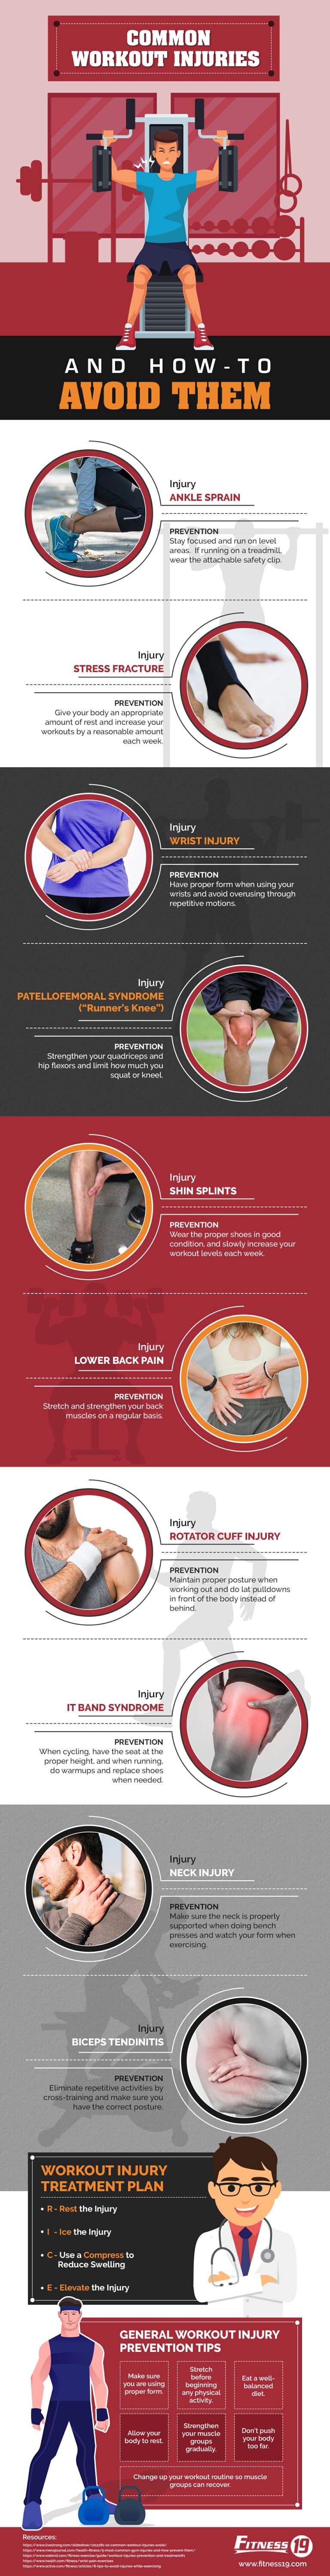 Common-Workout-Injuries-and-How-To-Avoid-Them